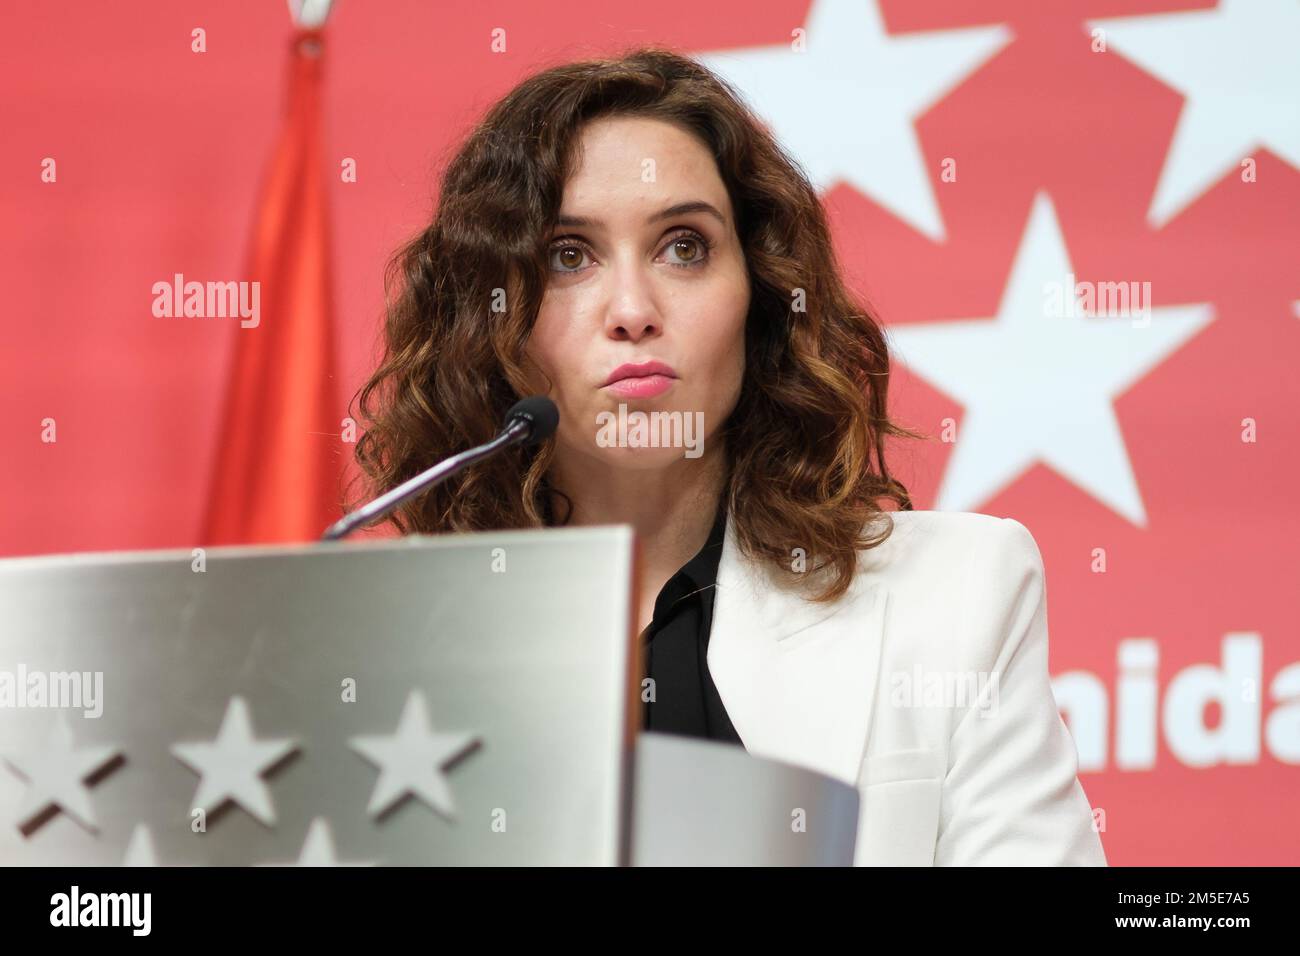 The president of the Community of Madrid, Isabel Diaz Ayuso, speaks during a press conference after the meeting of the Governing Council of the Community of Madrid, at the Real Casa de Correos in Madrid. Ayuso takes stock of the year and defends that her Government 'complies' with the people of Madrid and has managed 'well' against the 'authoritarianism of the Government that has not hesitated to punish the region' and that launches measures of 'engañabobos'. She defended that her good management is proven 'in the vitality of the streets of Madrid, in its cultural, business and tourist life'. Stock Photo